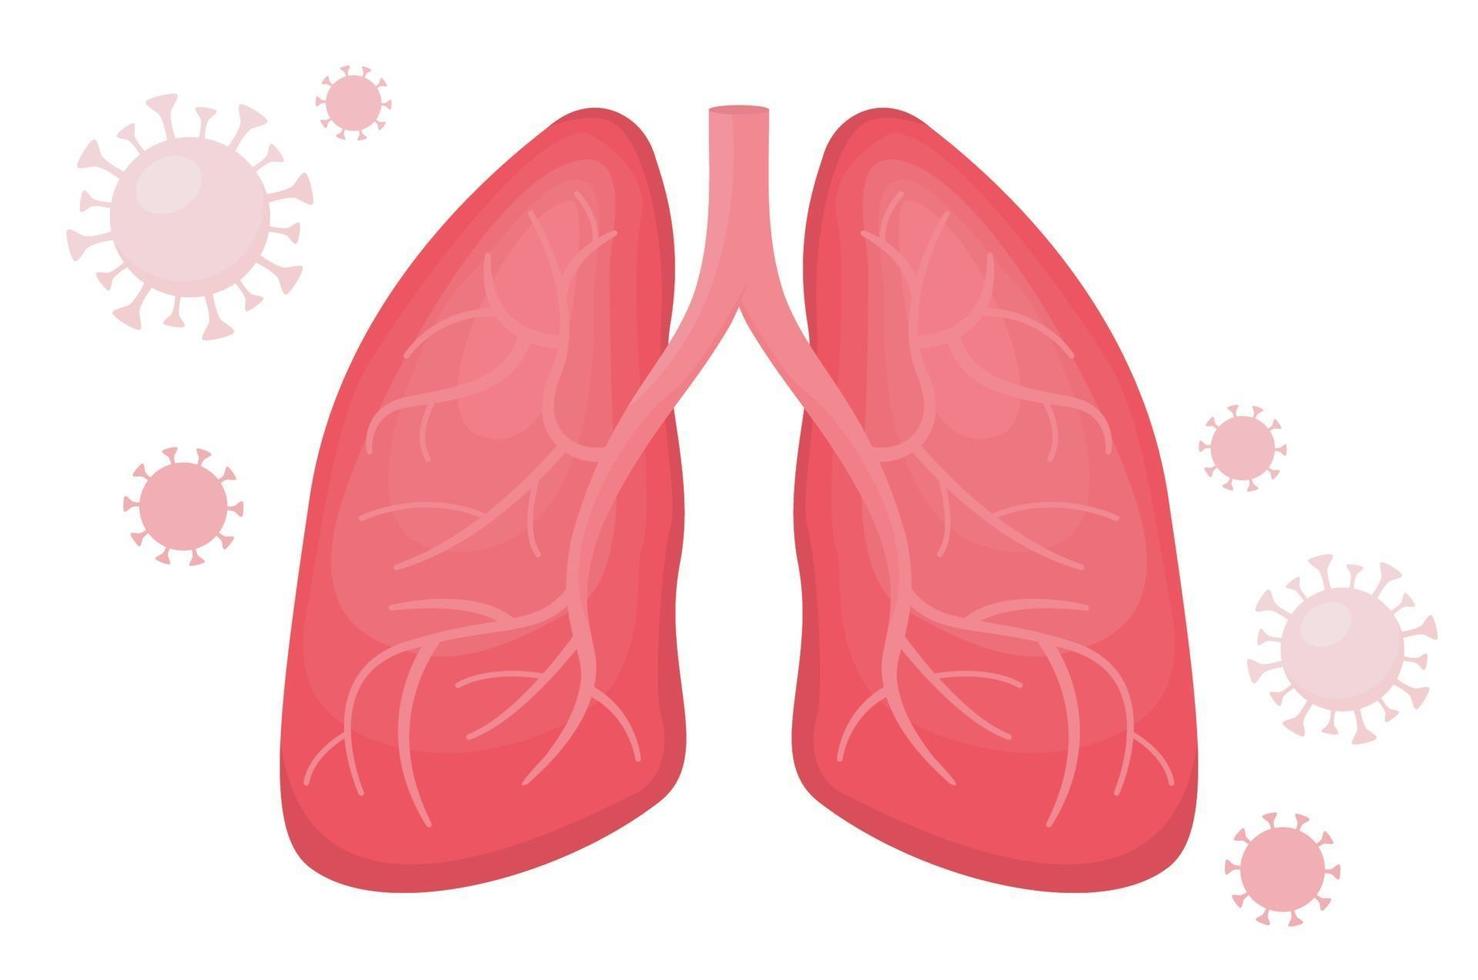 Healthy human lungs with viral pneumonia covid vector